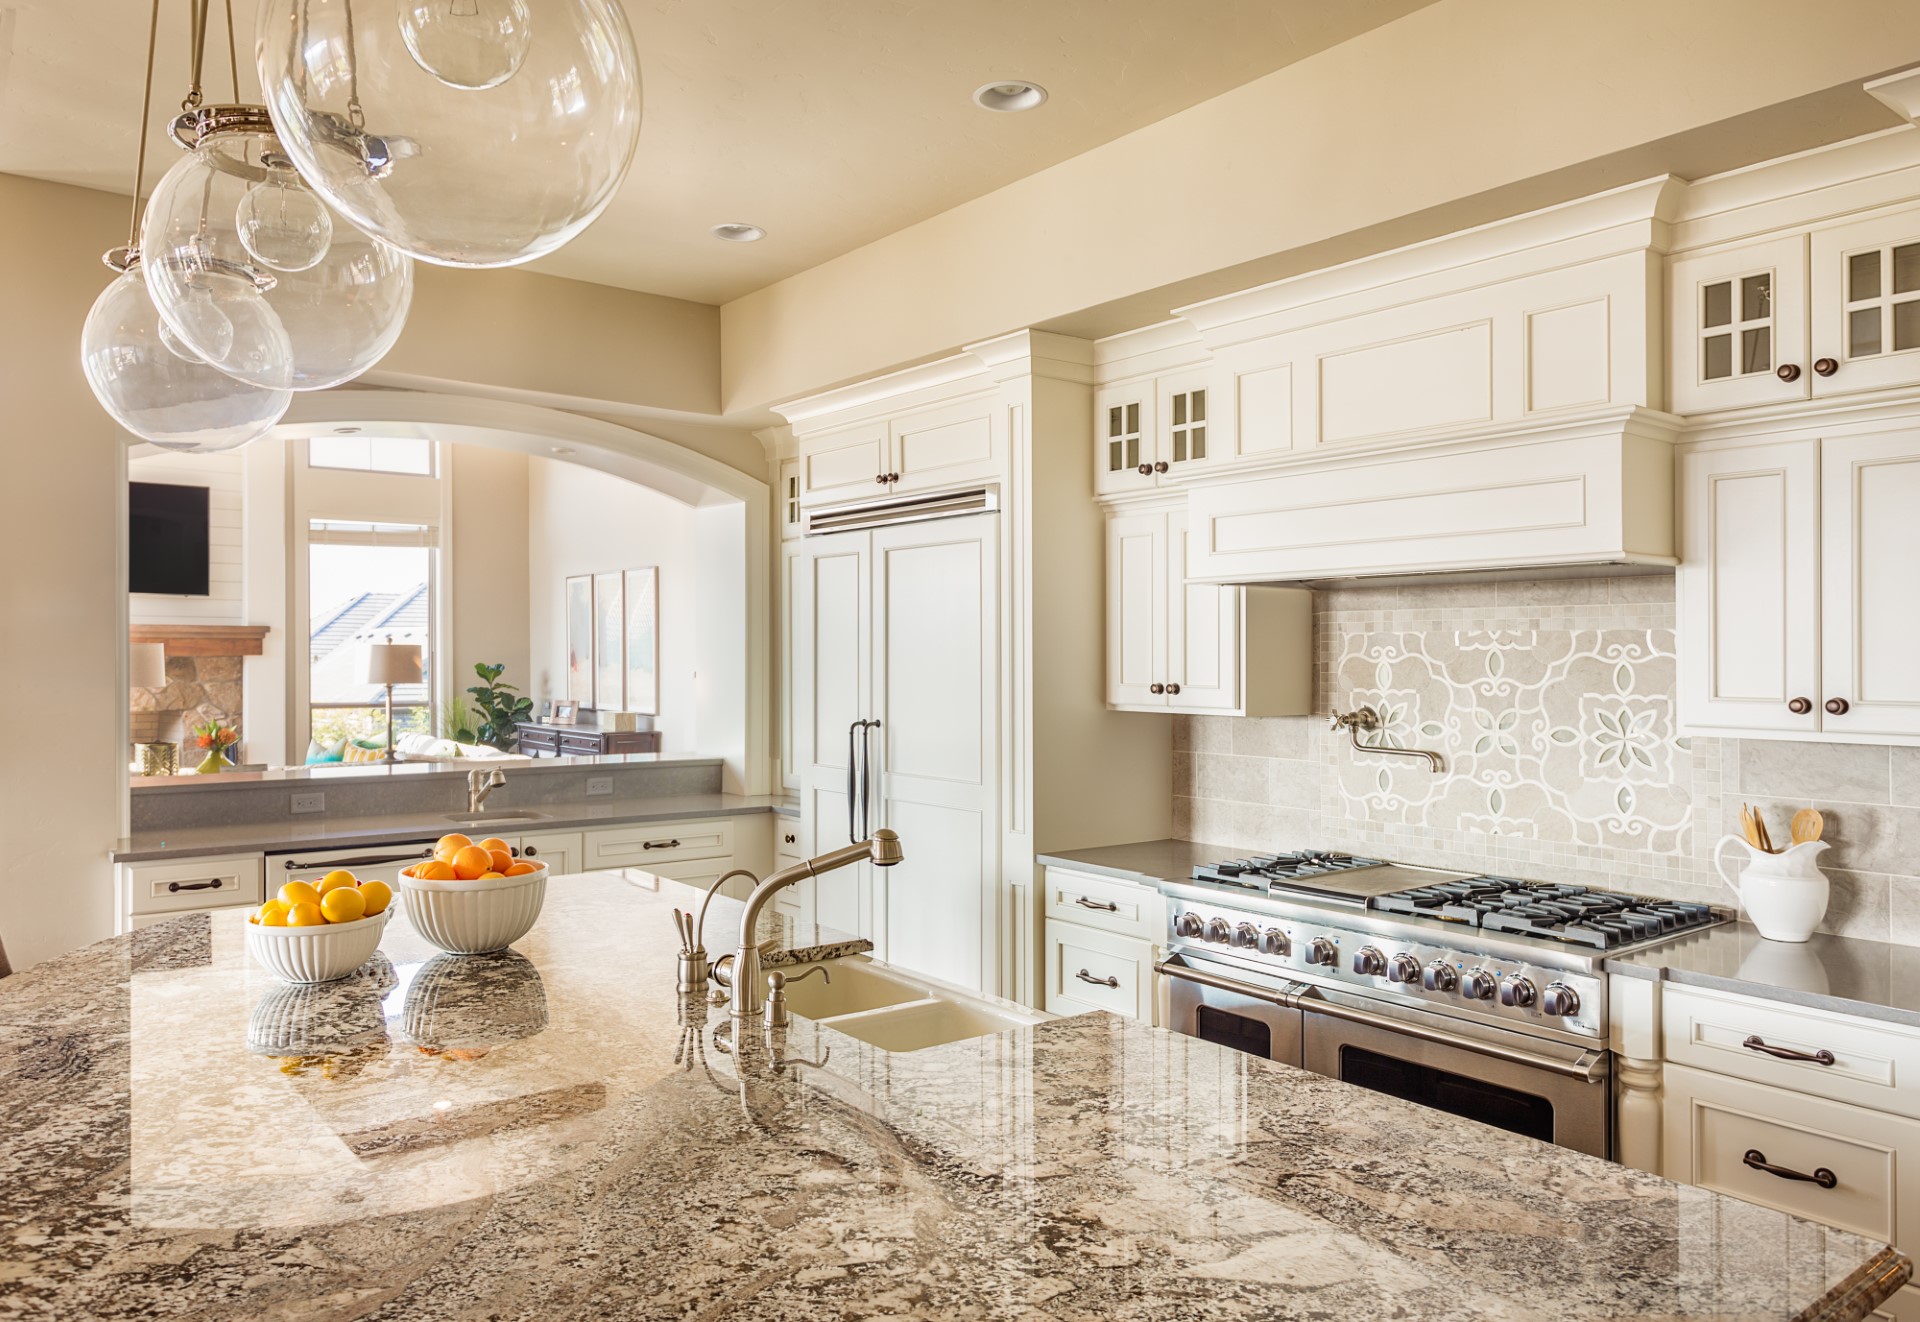 This is a beautiful kitchen design with a granite slab that is sure to amaze. A kitchen like this gives off a Cape Cod type of ambiance, and the best part is it has two sinks so your kids can do dishes with you.